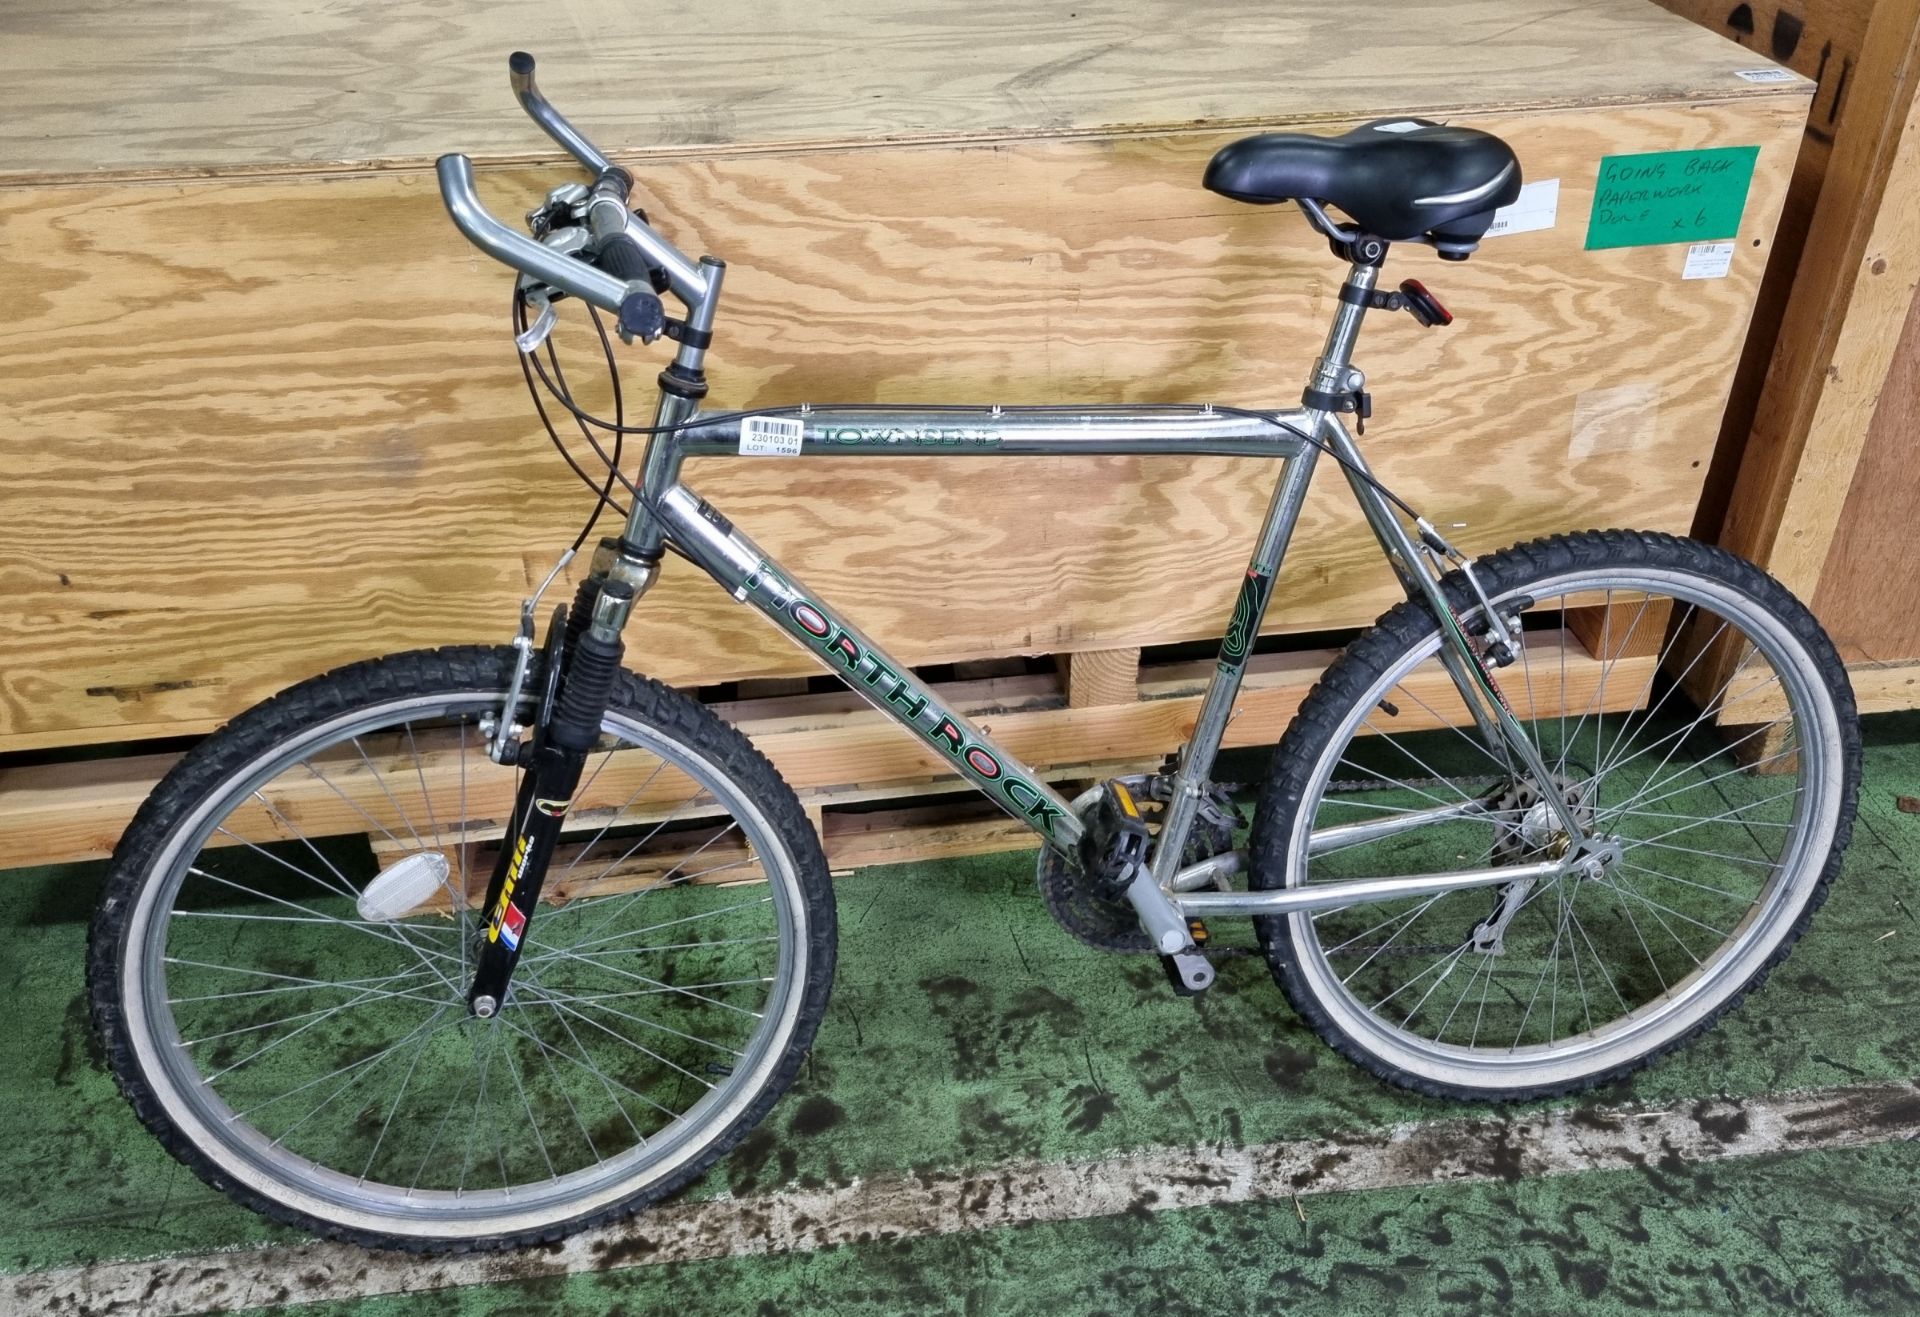 Townsend NorthRock bicycle